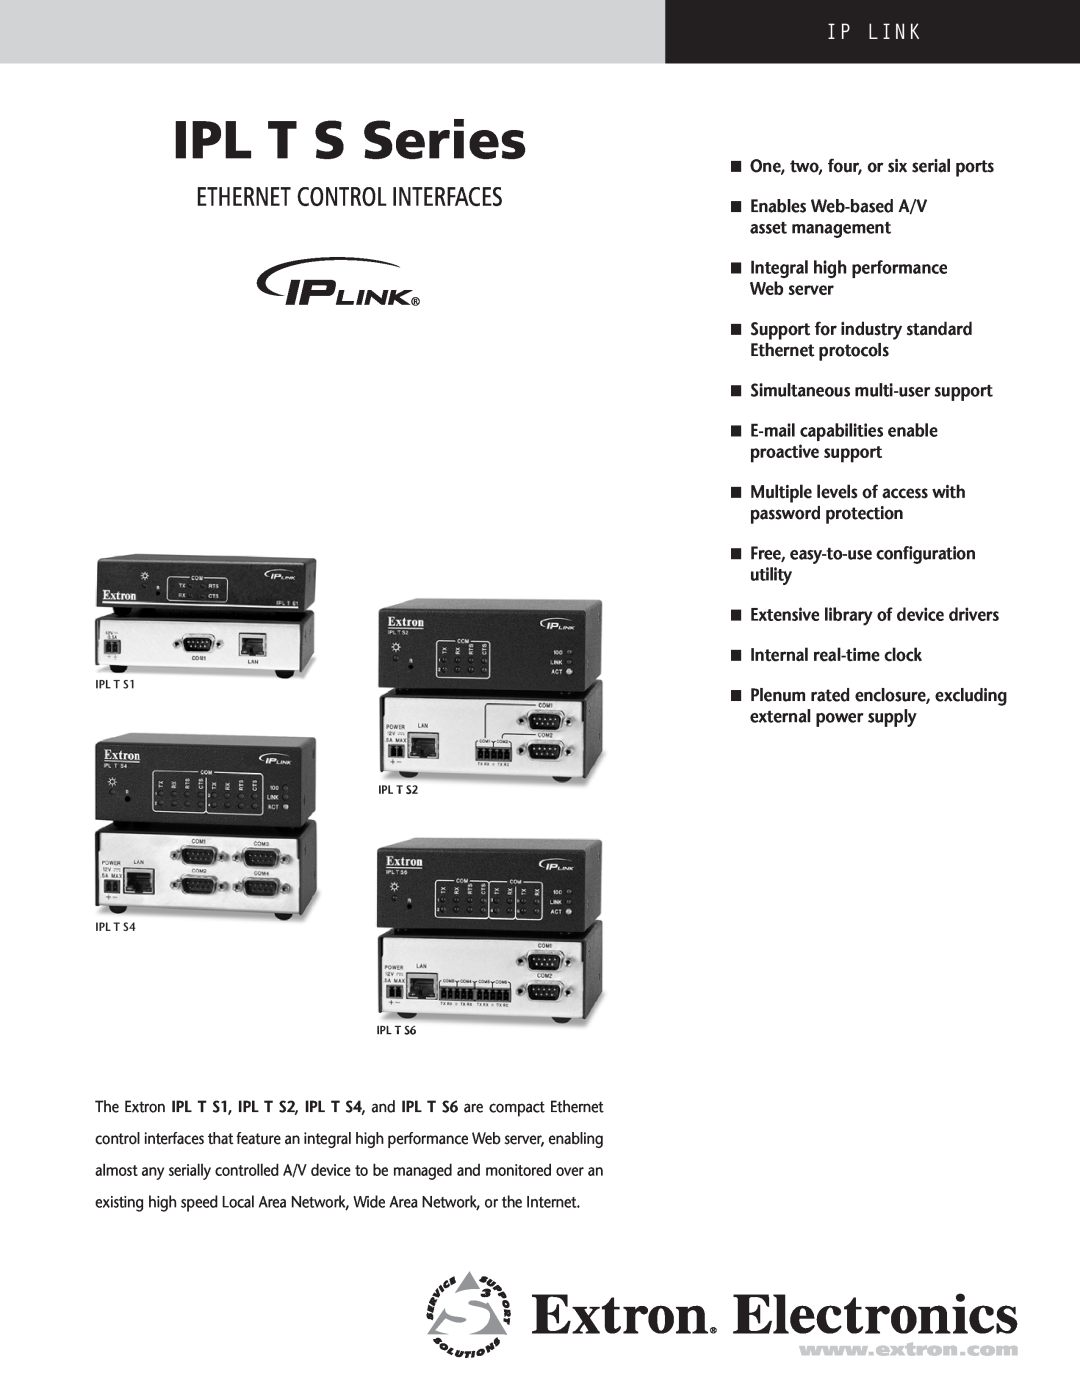 Extron electronic manual Ethernet Control Interfaces, n Enables Web-based A/V asset management, IPL T S Series, IP Link 